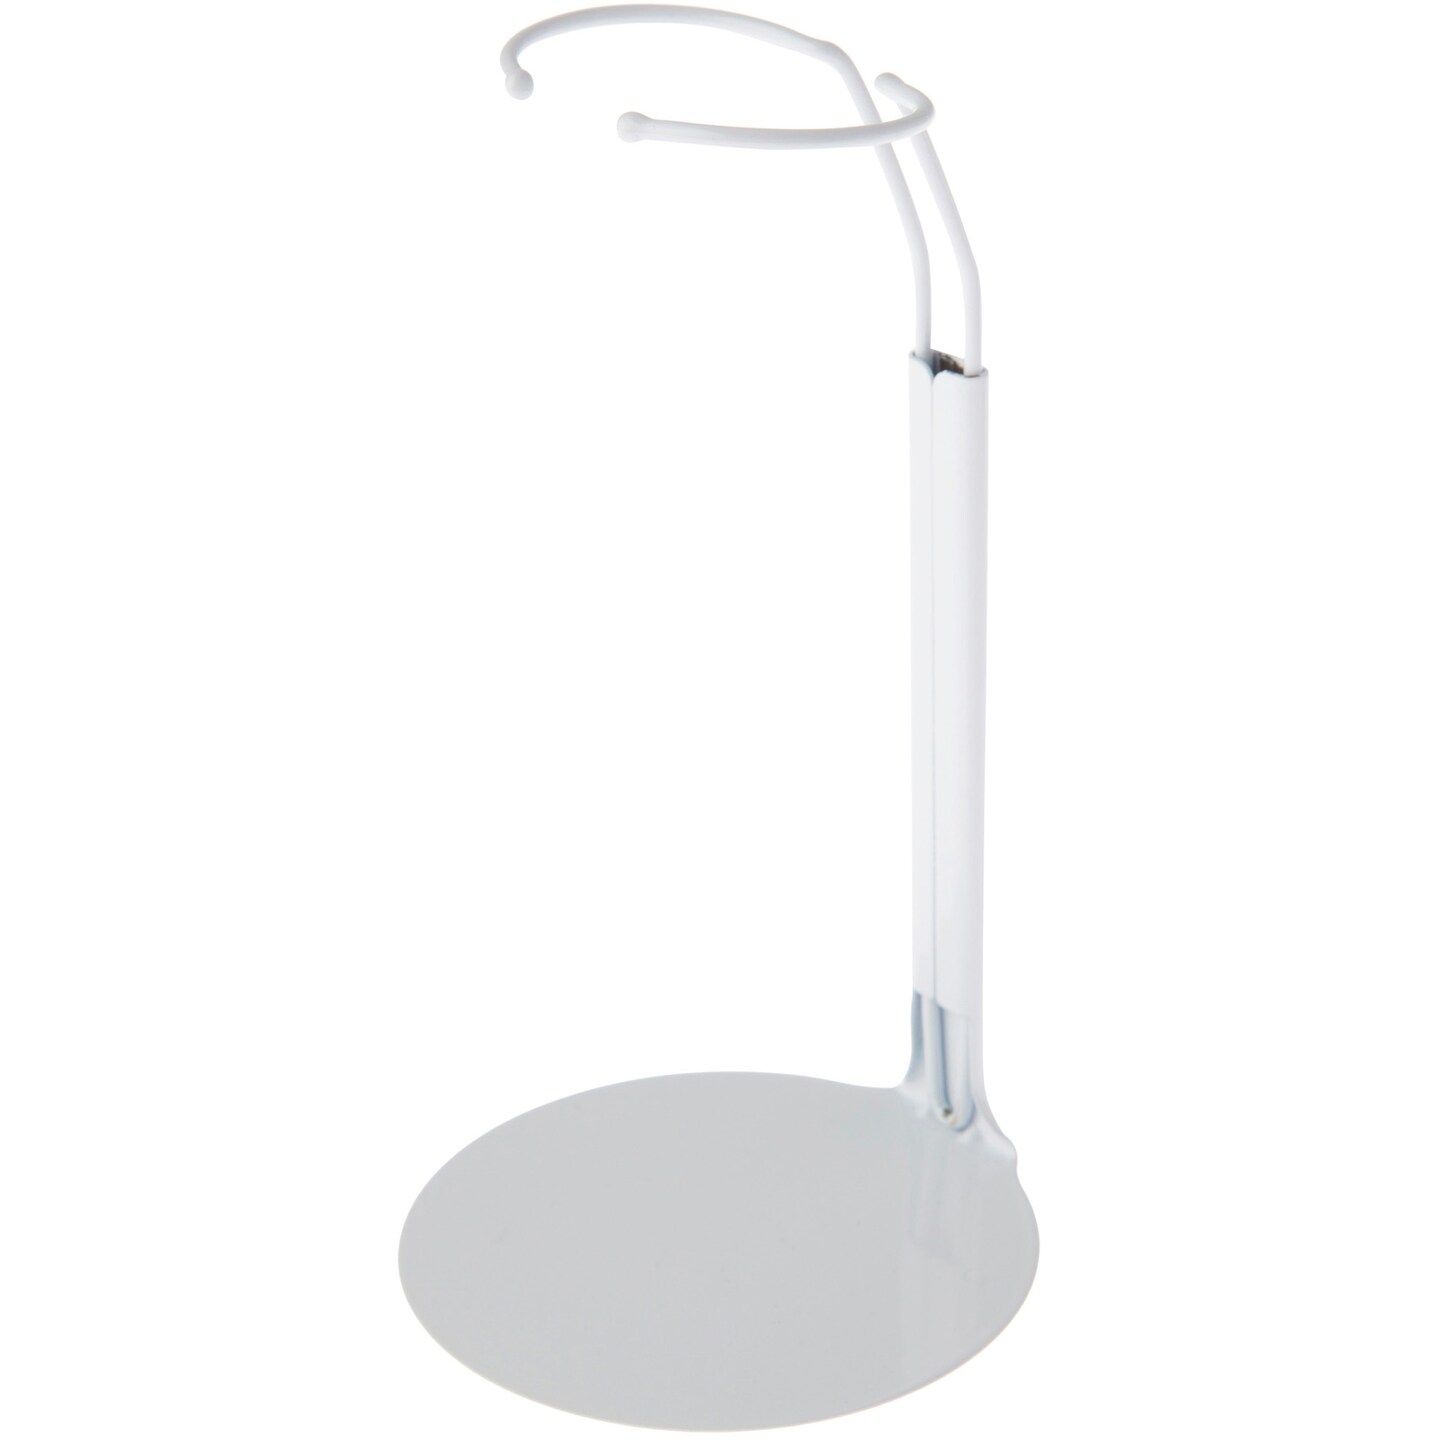 Plymor DSP-5175W White Adjustable Doll Stand, fits 10, 11, and 12 inch Dolls or Action Figures, Waist is 1.75 to 2.25 inches wide, 5 to 6 inches around